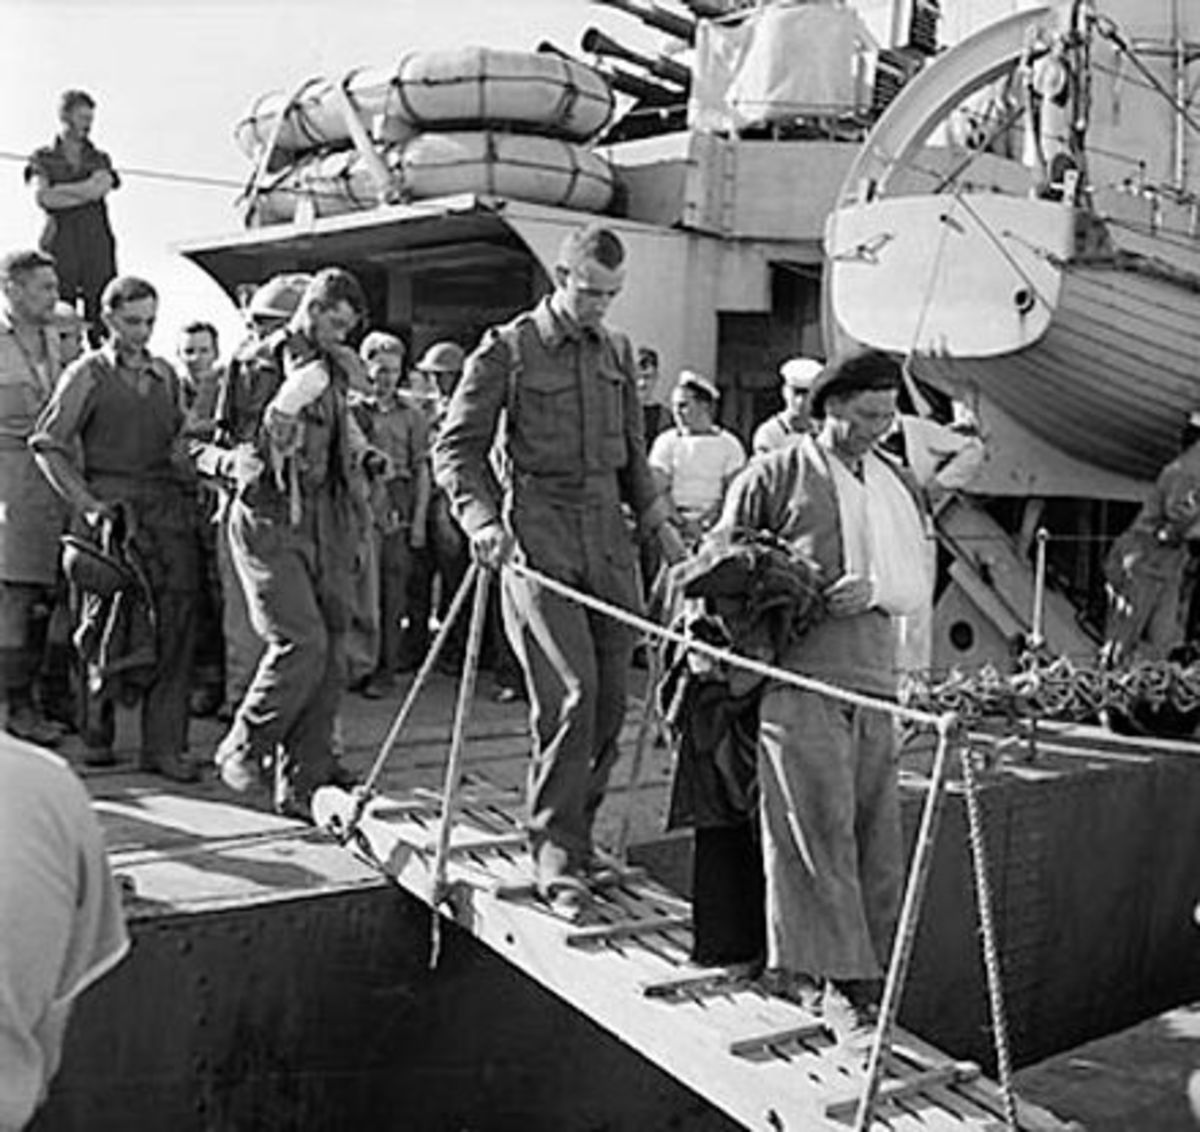 Wounded British troops disembark in Alexandria after being evacuated from Crete at the end of May, 1941